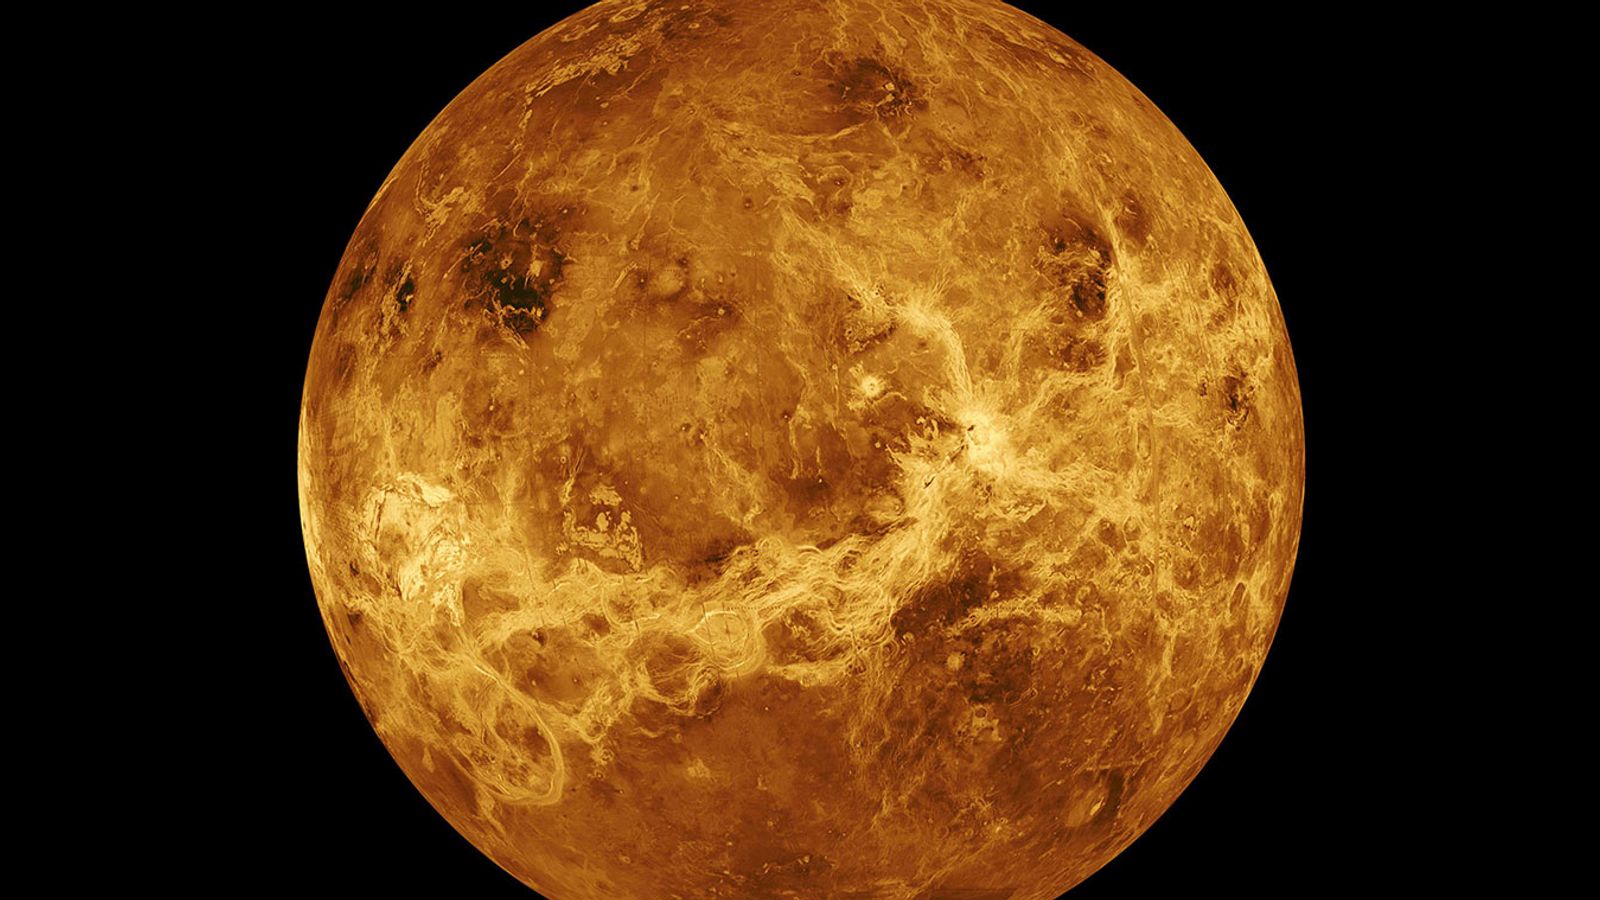 NASA plans two new missions to Venus for the first time in decades